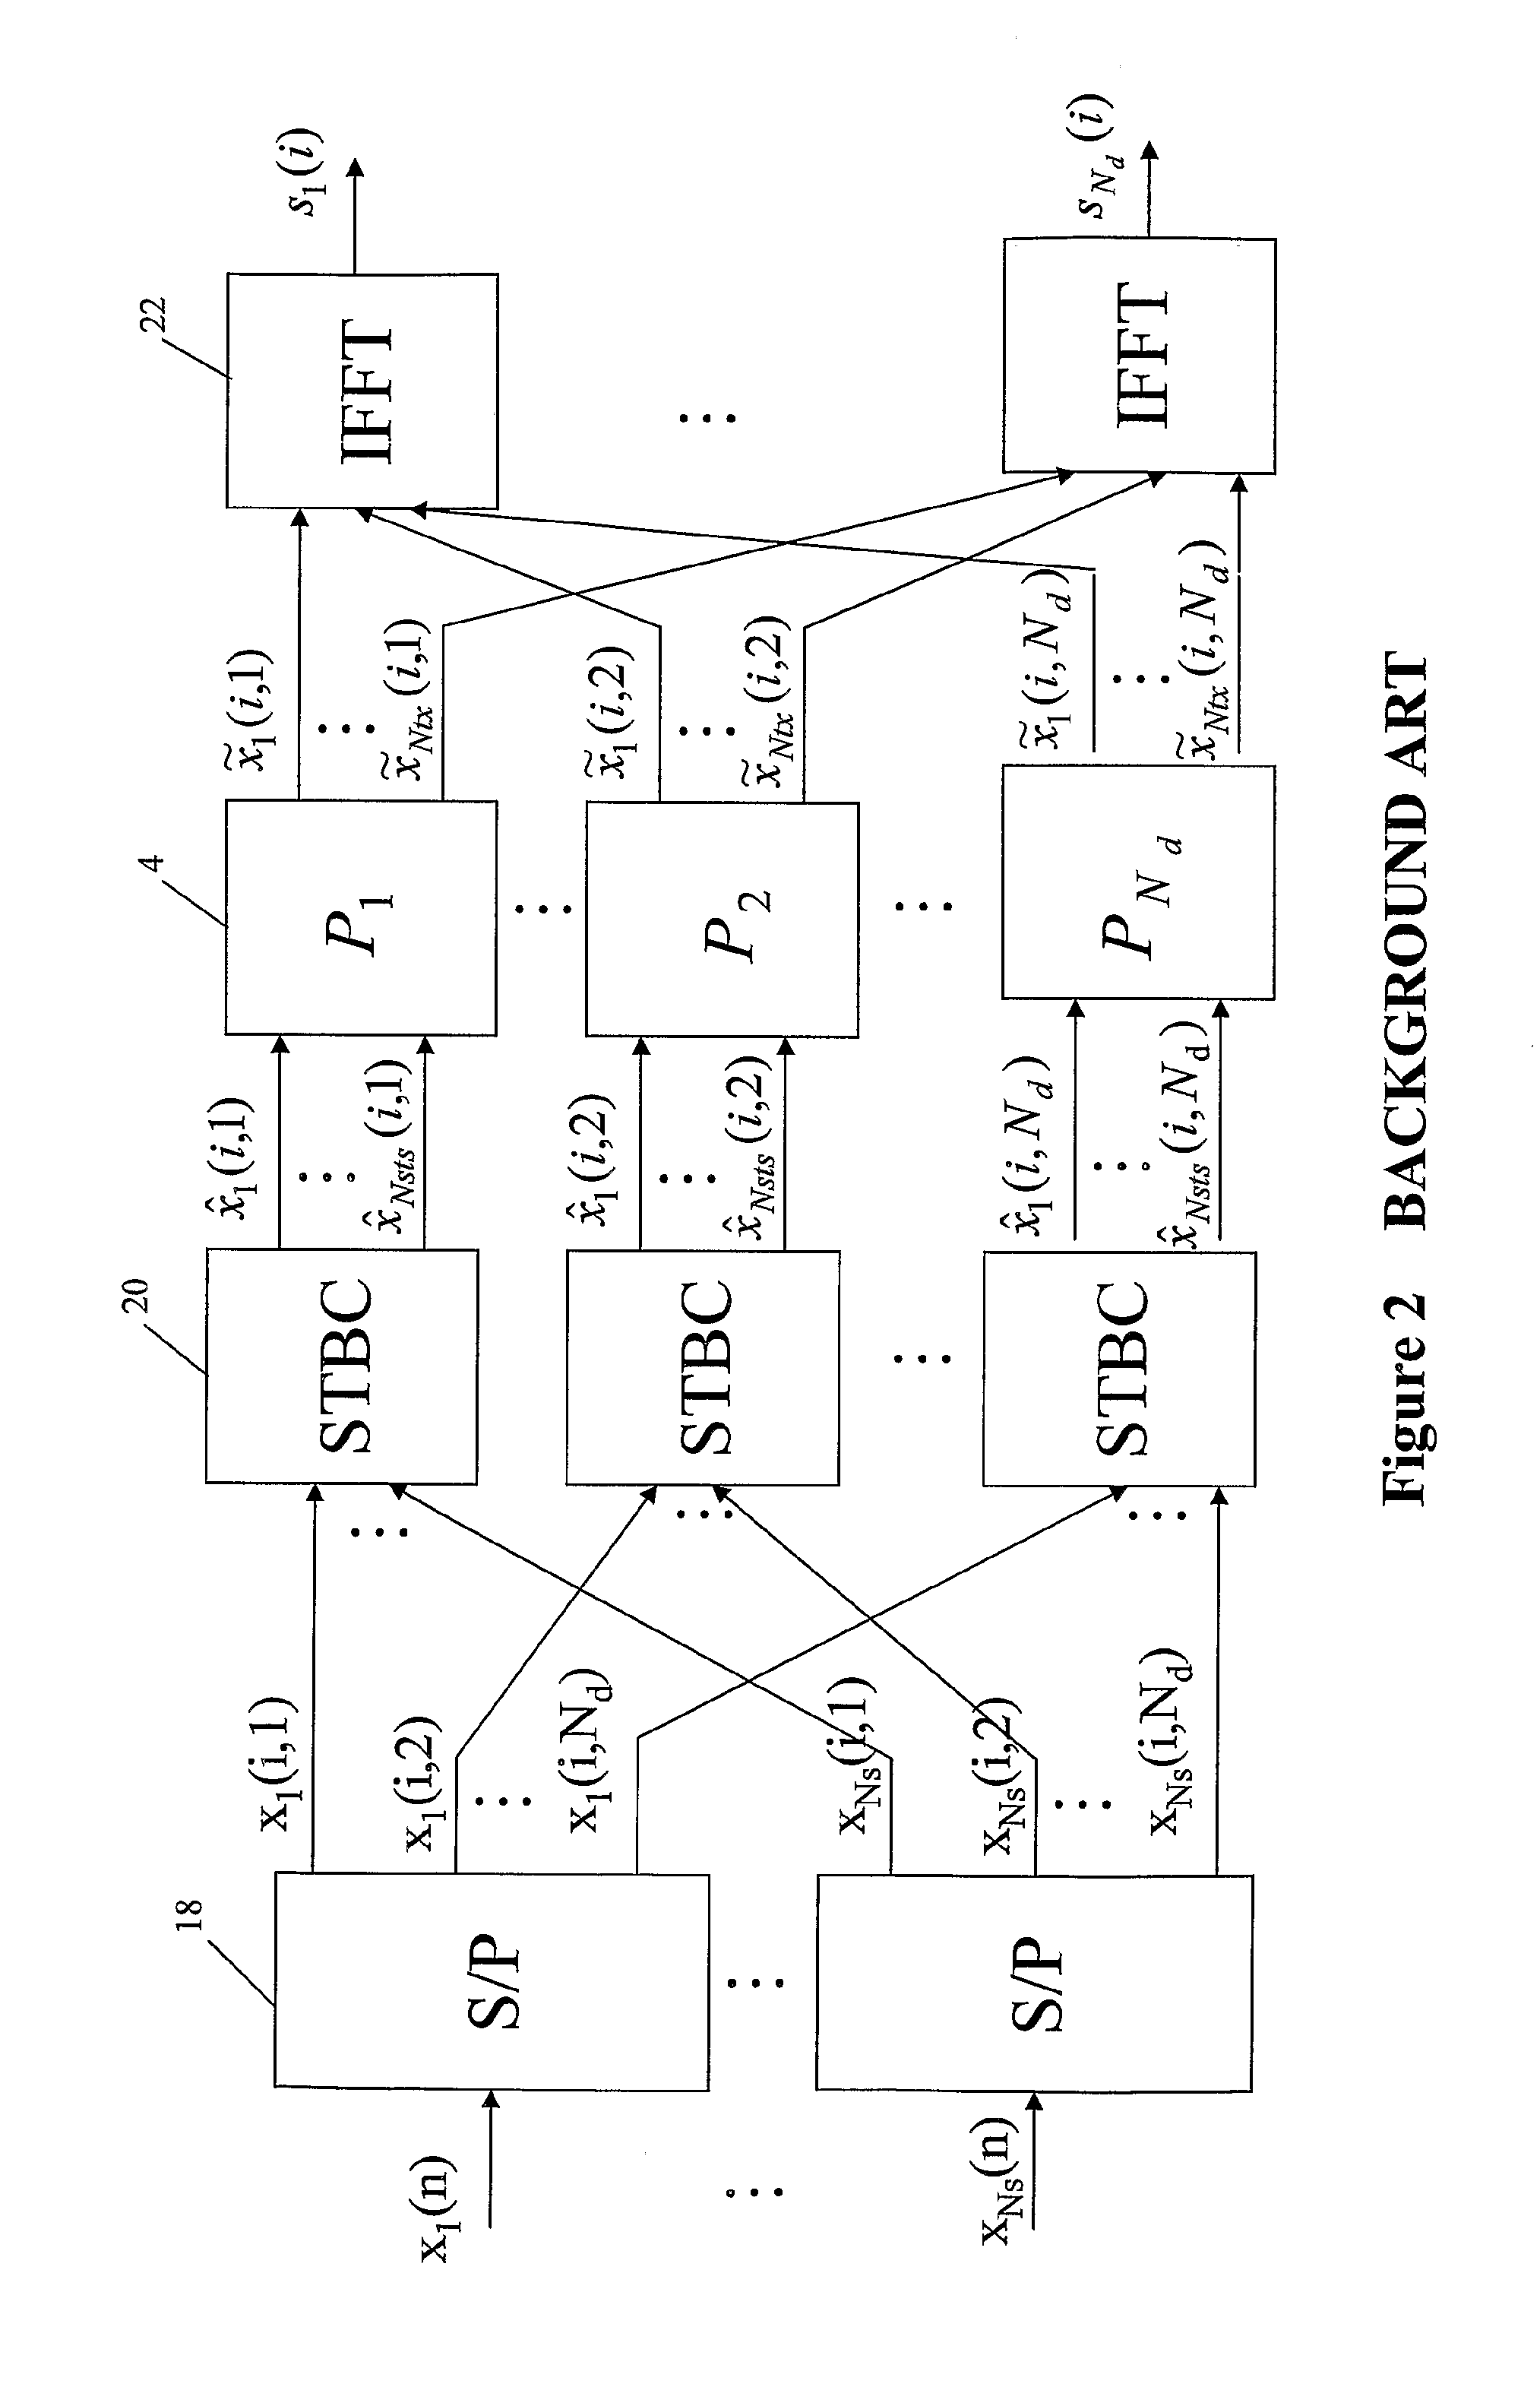 Mapping for MIMO Communication Apparatus